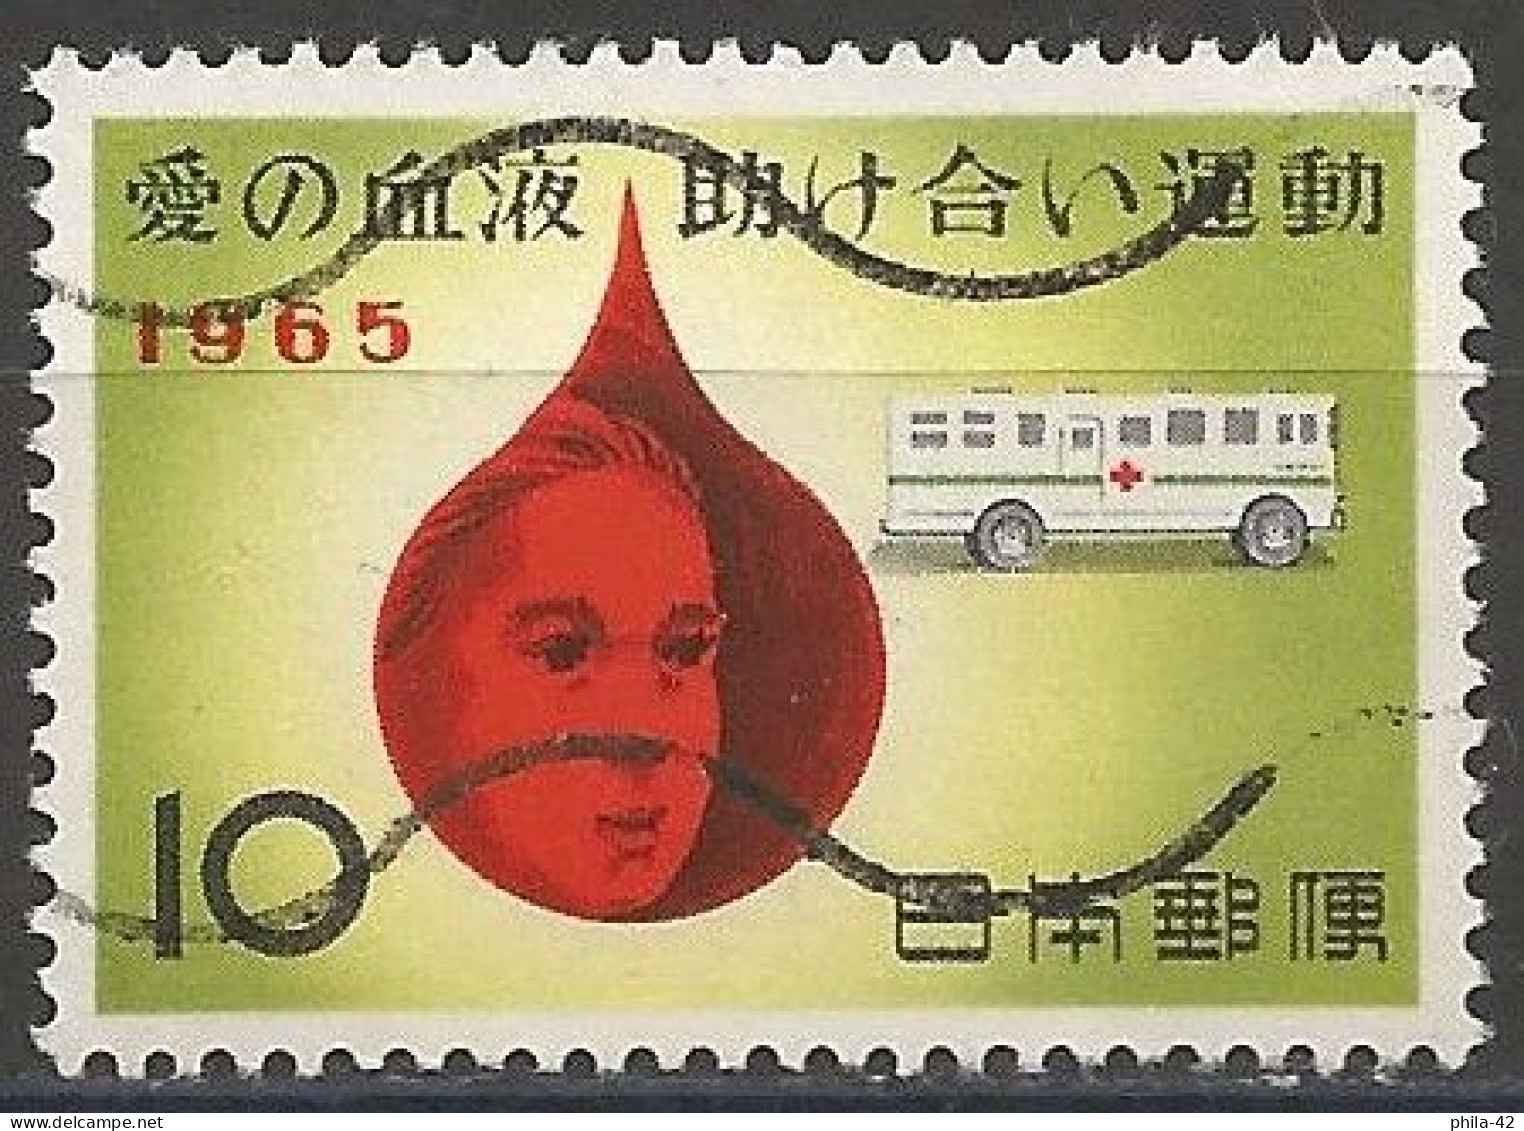 Japan 1965 - Mi 895 - YT 809 ( Blood Donation Campaign ) - Used Stamps